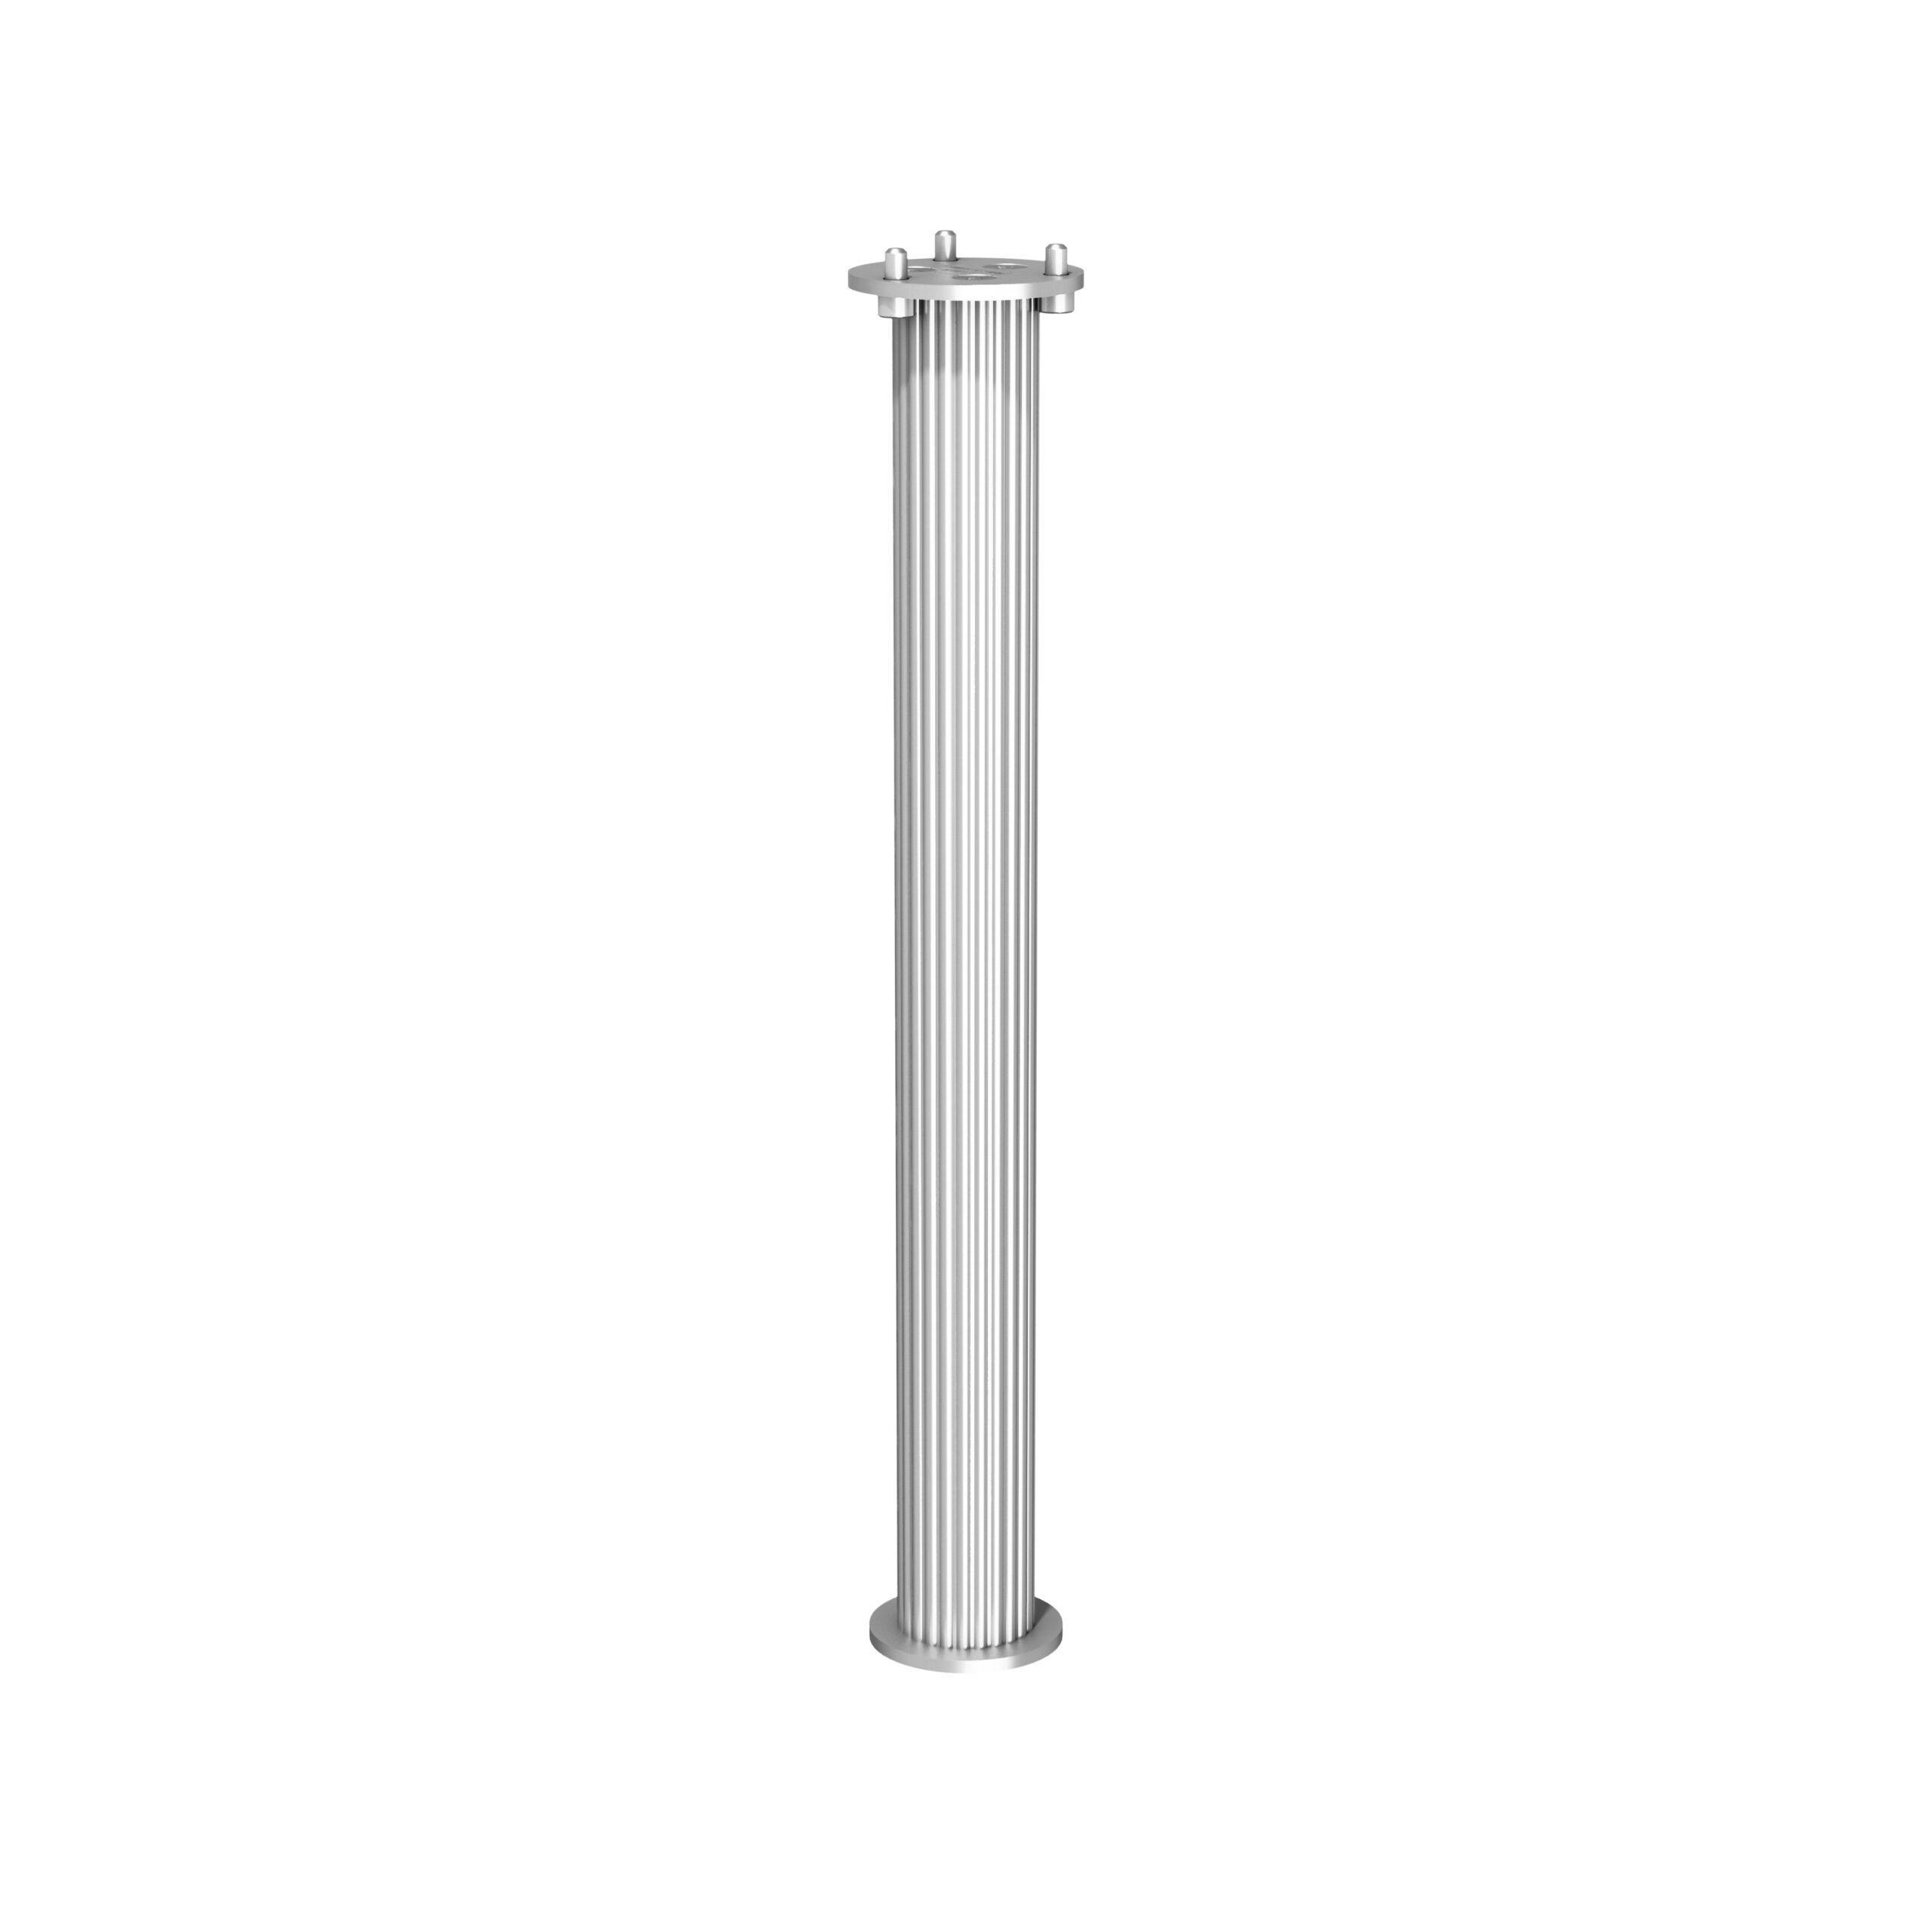 WMM-0006-02 - WMM-0006-02 – 12” / 30.5 cm Fluted Post for M Series / VHM Arms